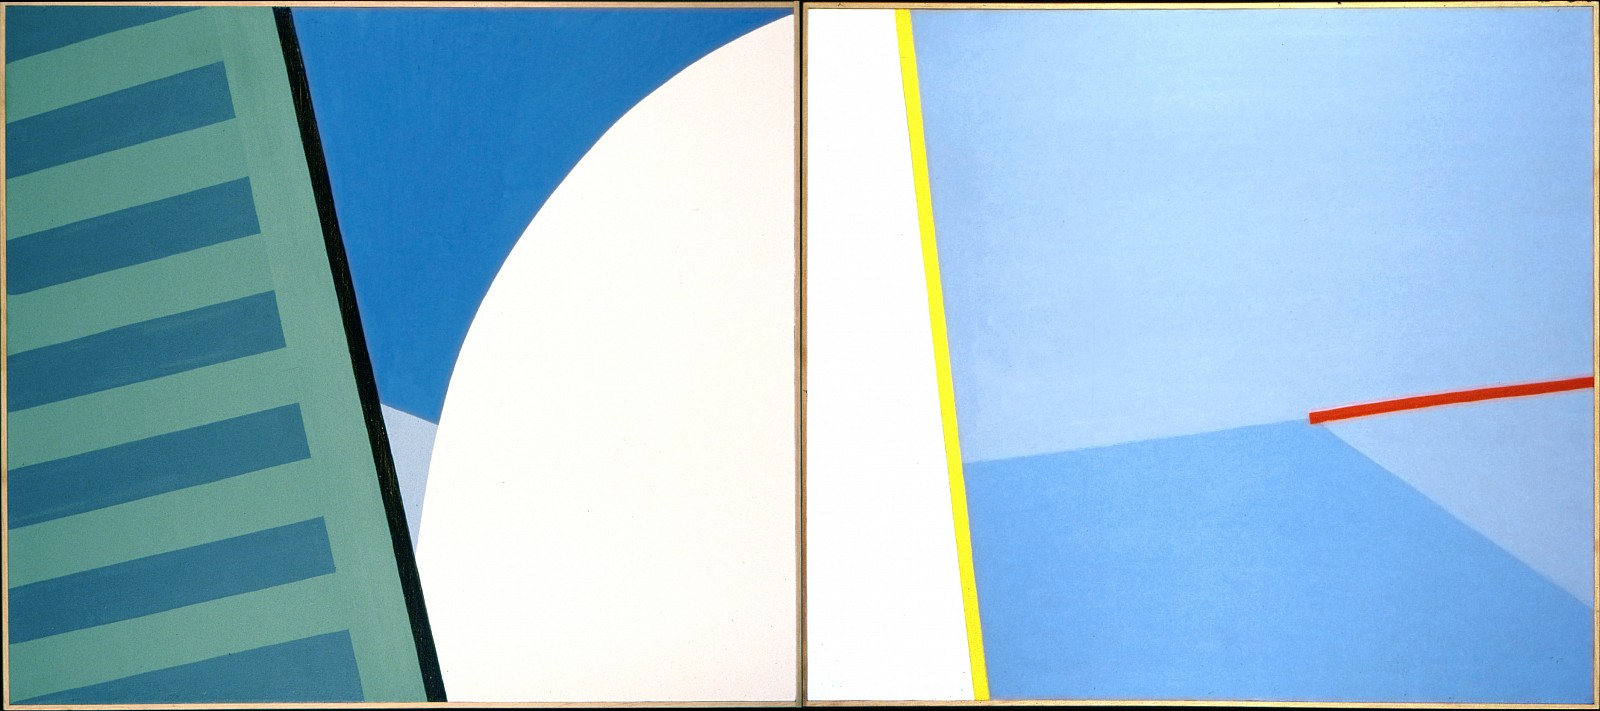 Angelo Ippolito, Scudding Winward, from the Regatta Series (diptych), 1986
Oil on canvas, 48 x 108 in.
IPP004